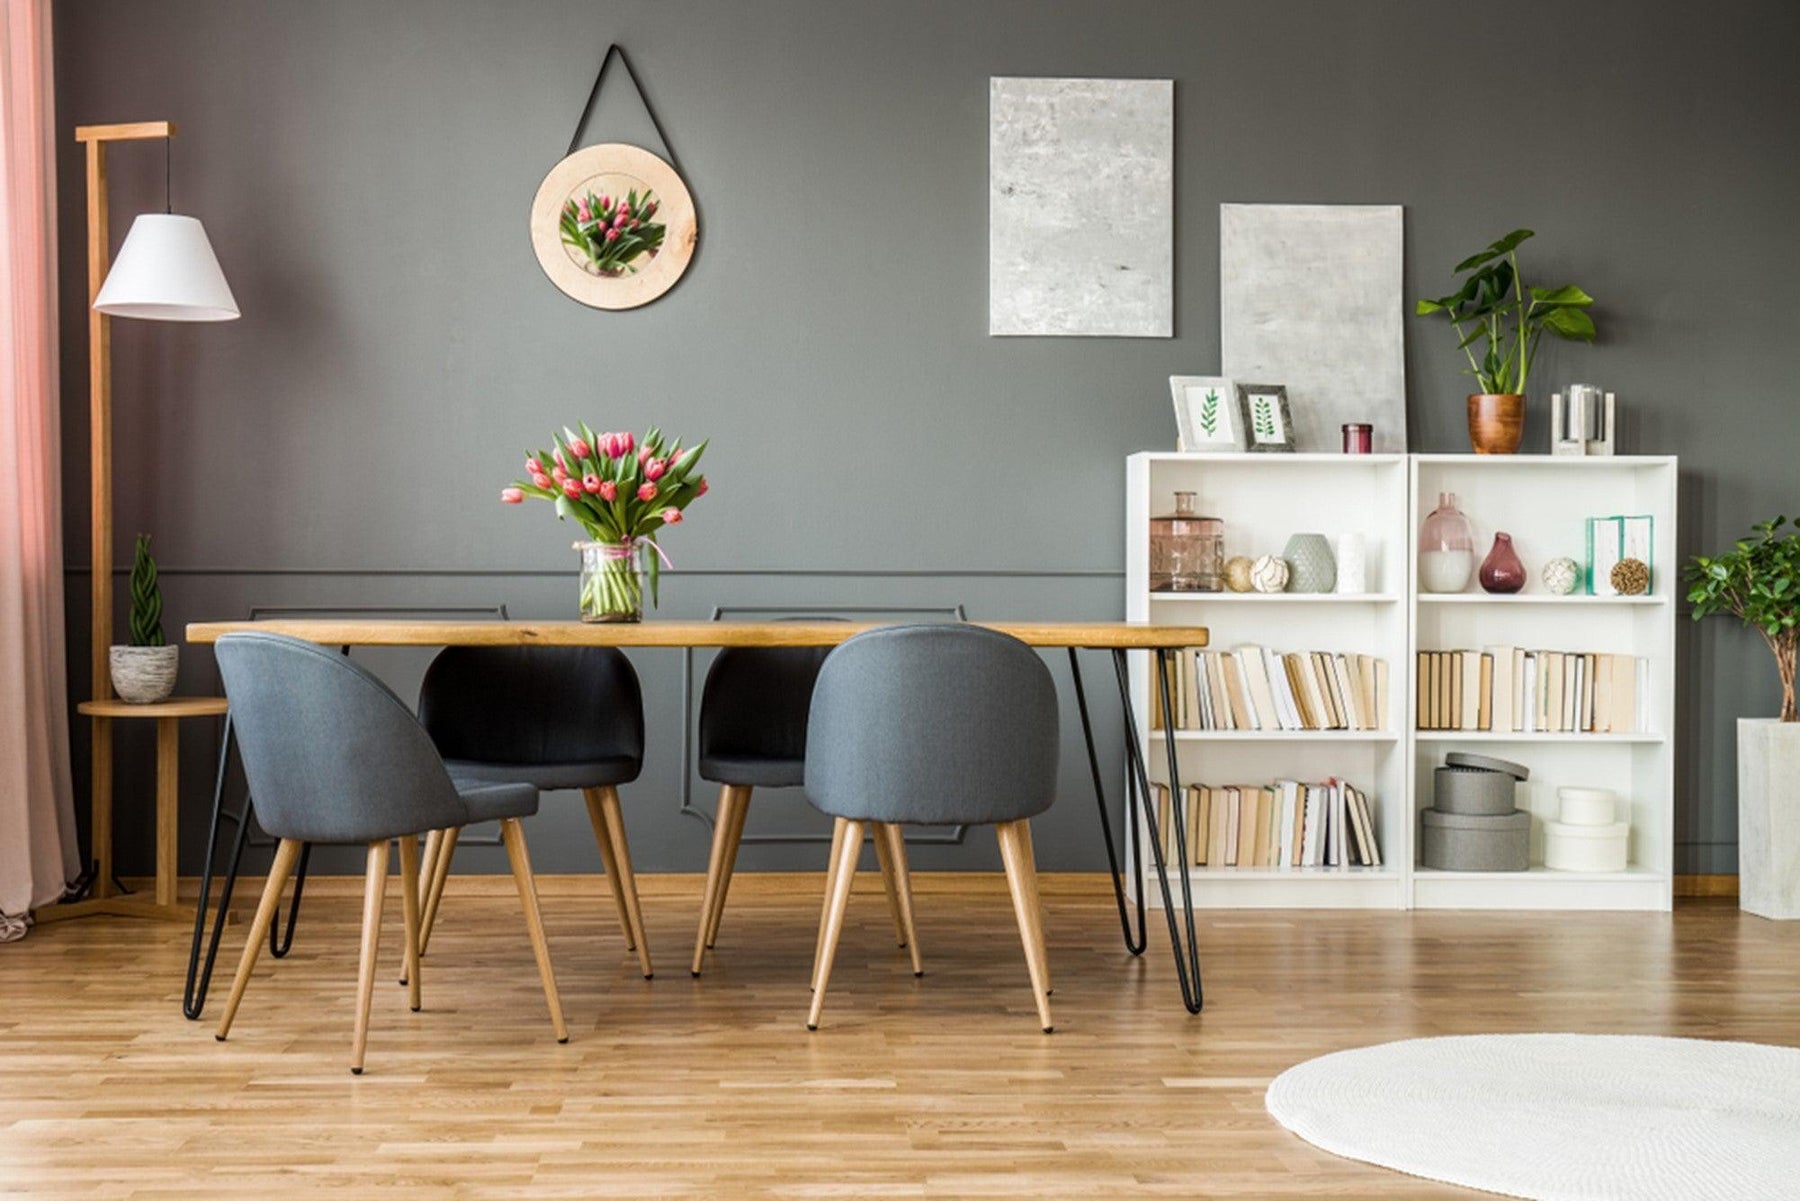 Dining Room Design that Draws You In - HomesToLife